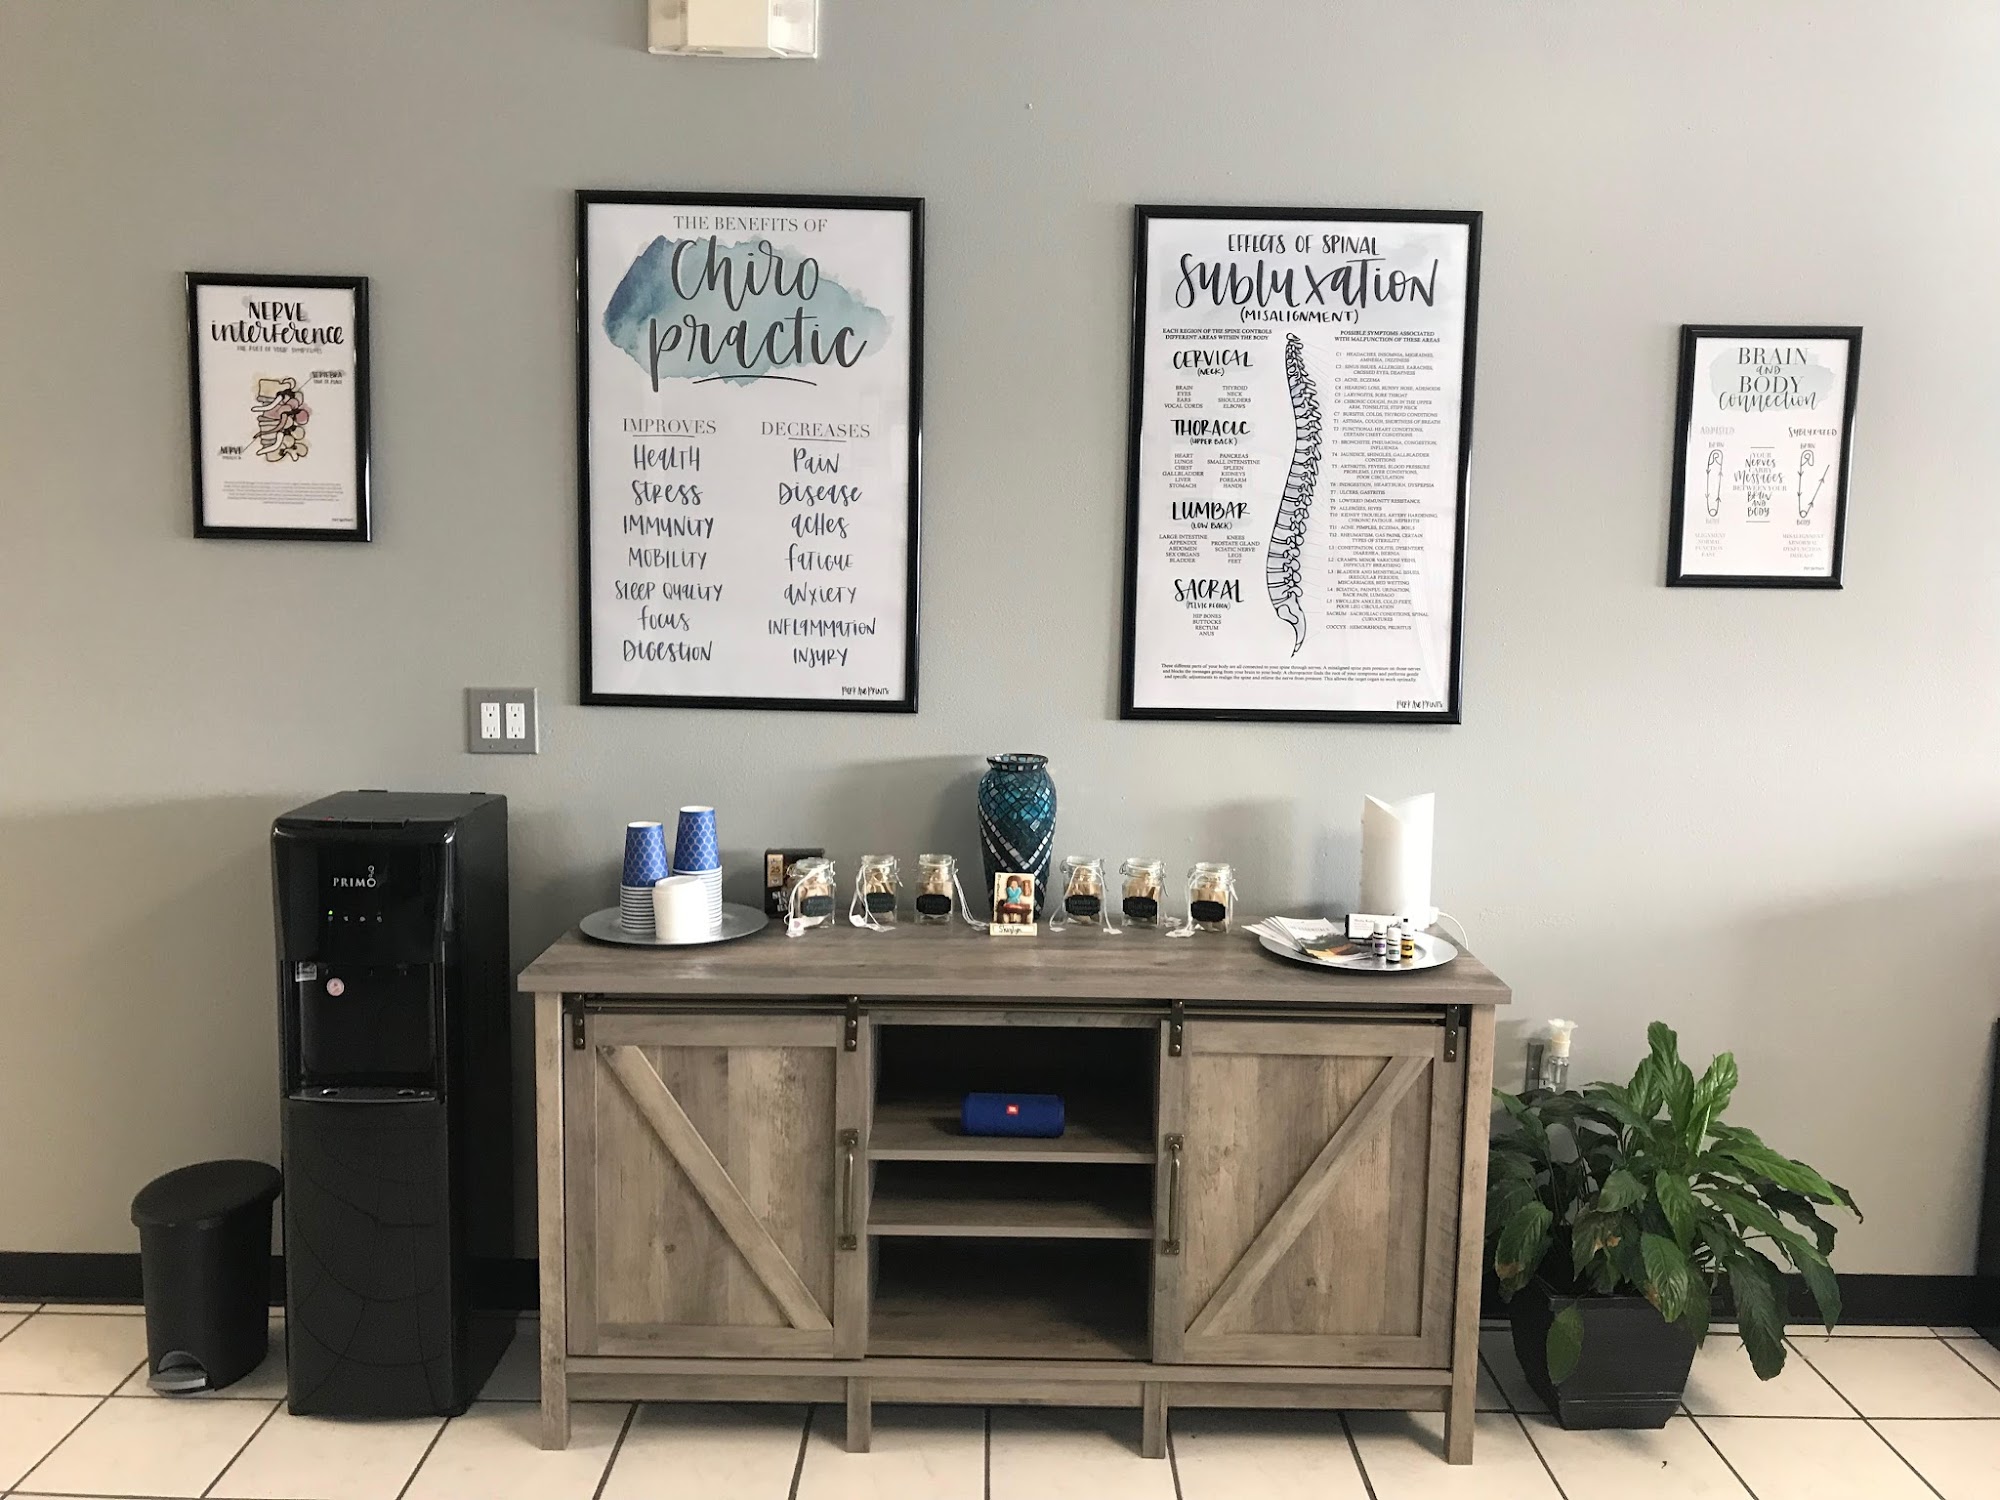 Oasis Family Chiropractic